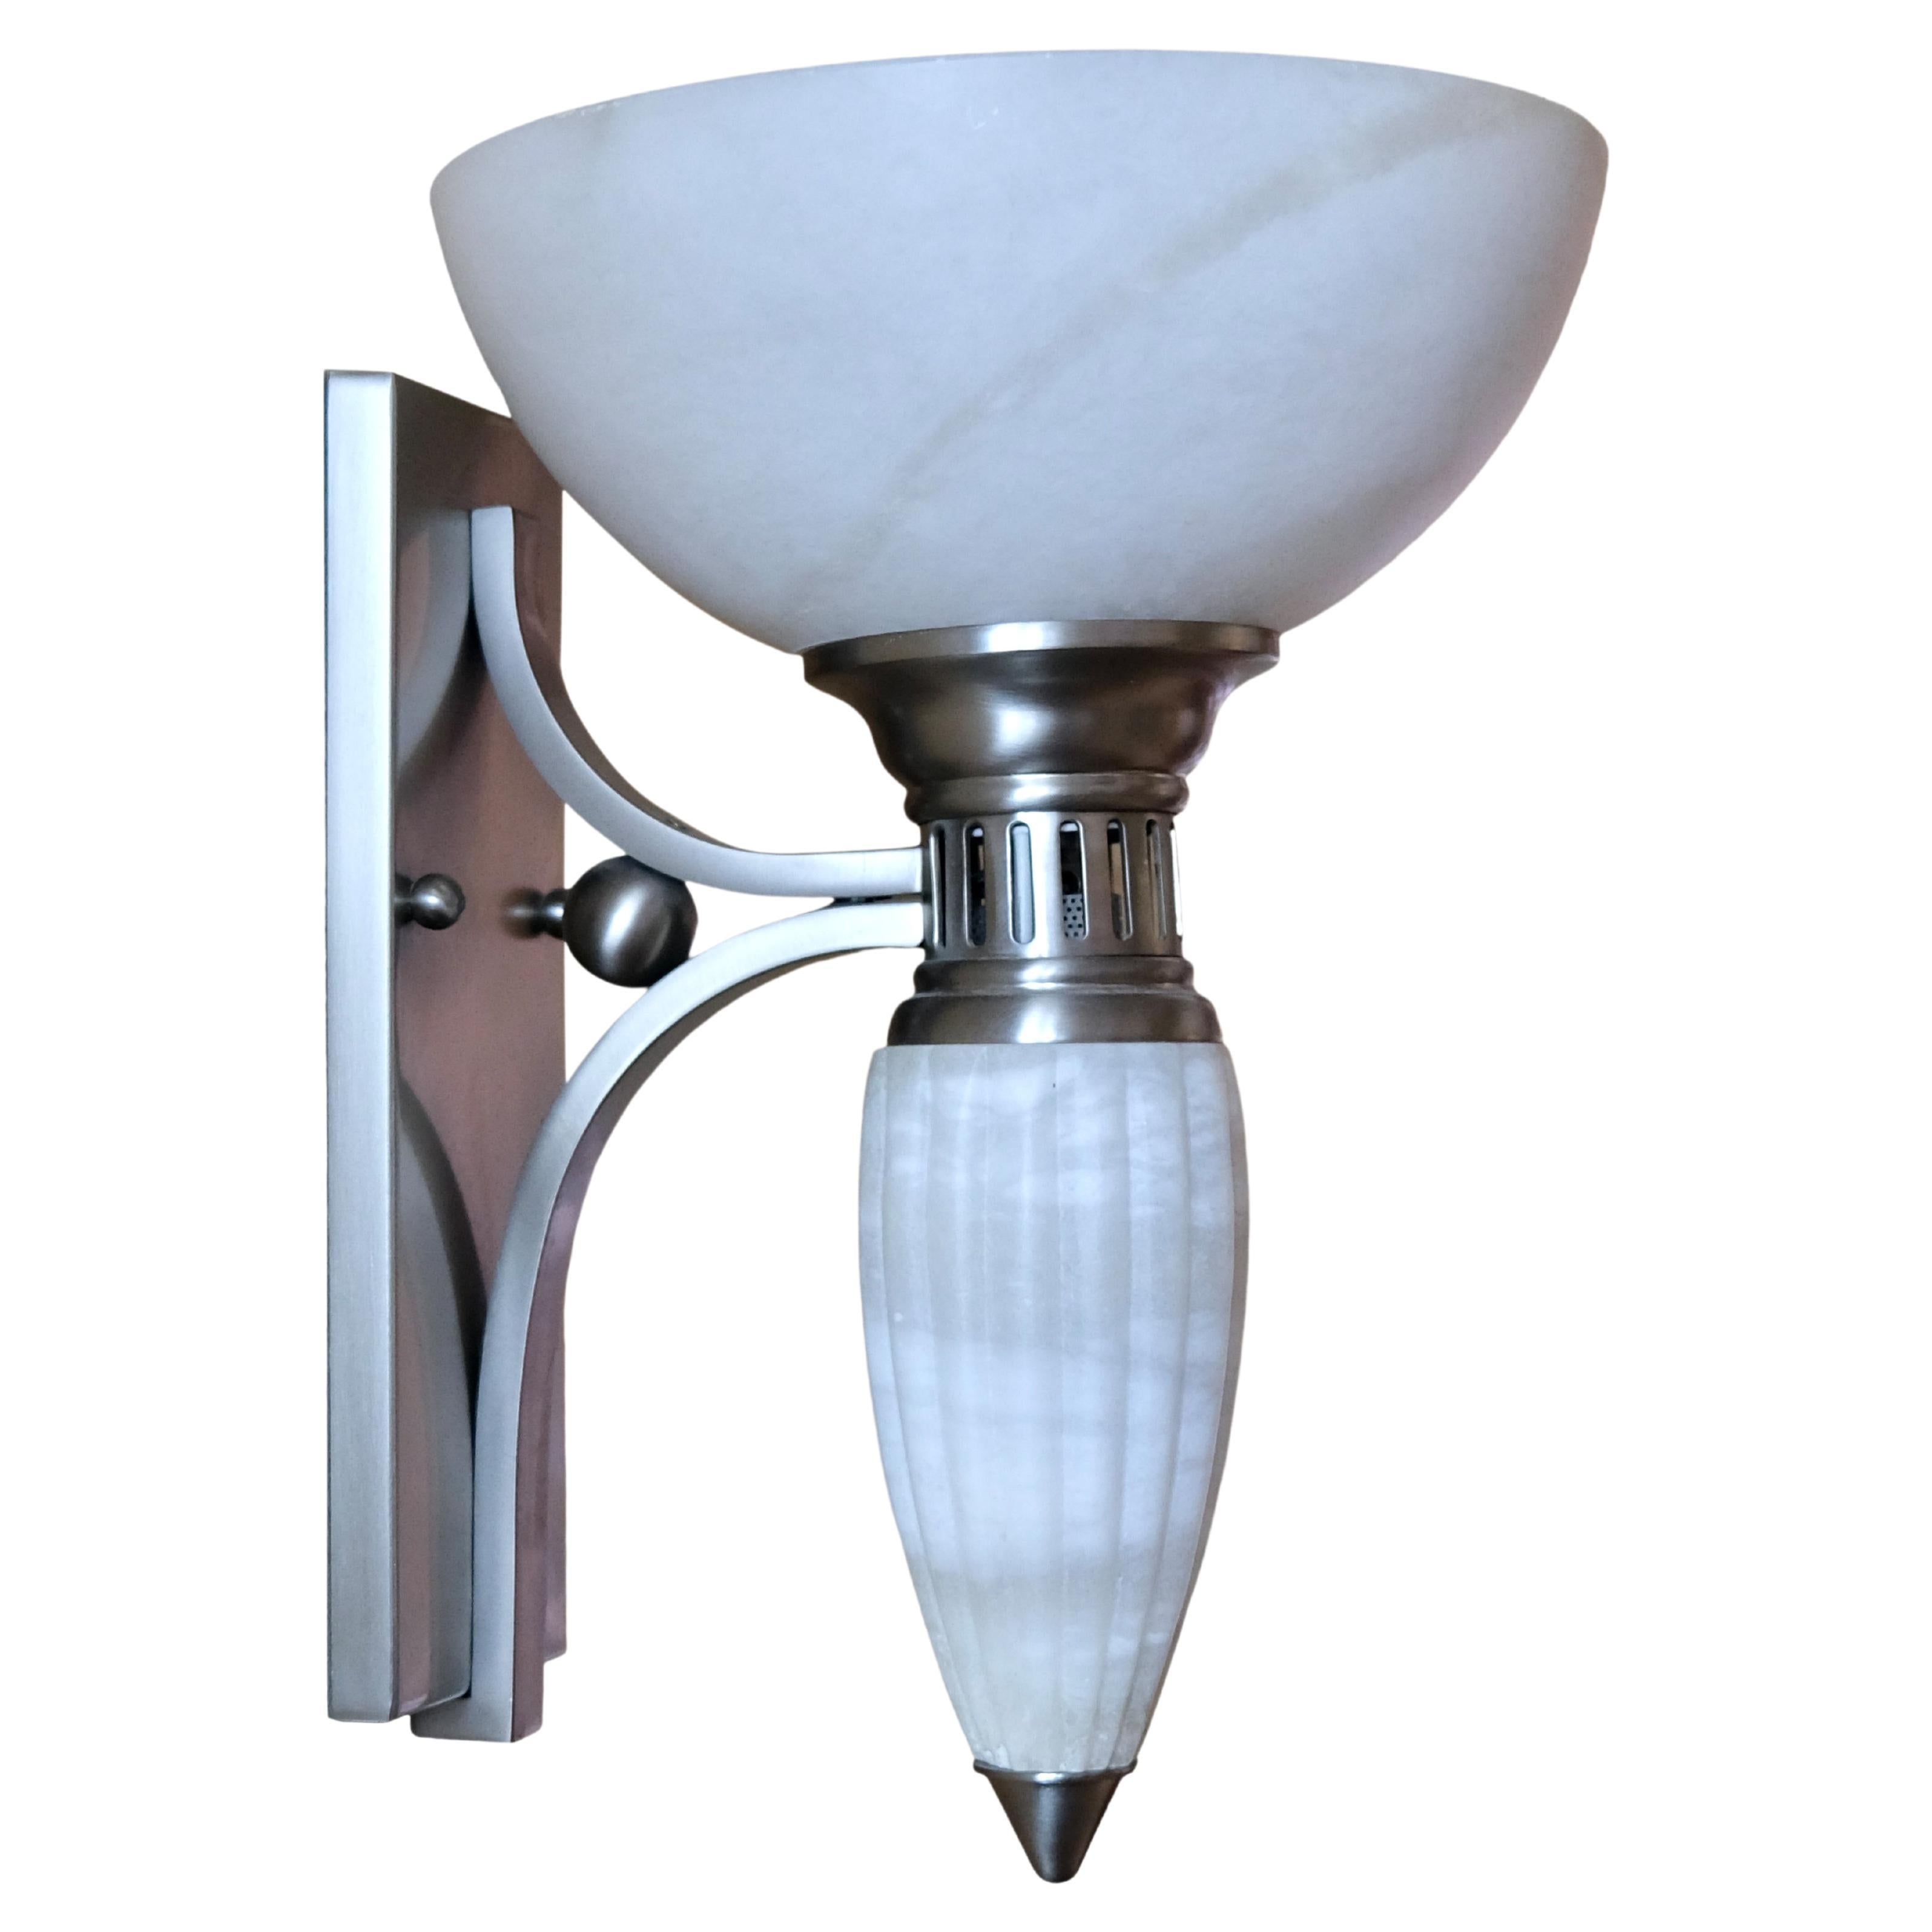 Set of 2 Art Deco Style Wall Sconces with Alabaster Bowls and Illuminated Cones